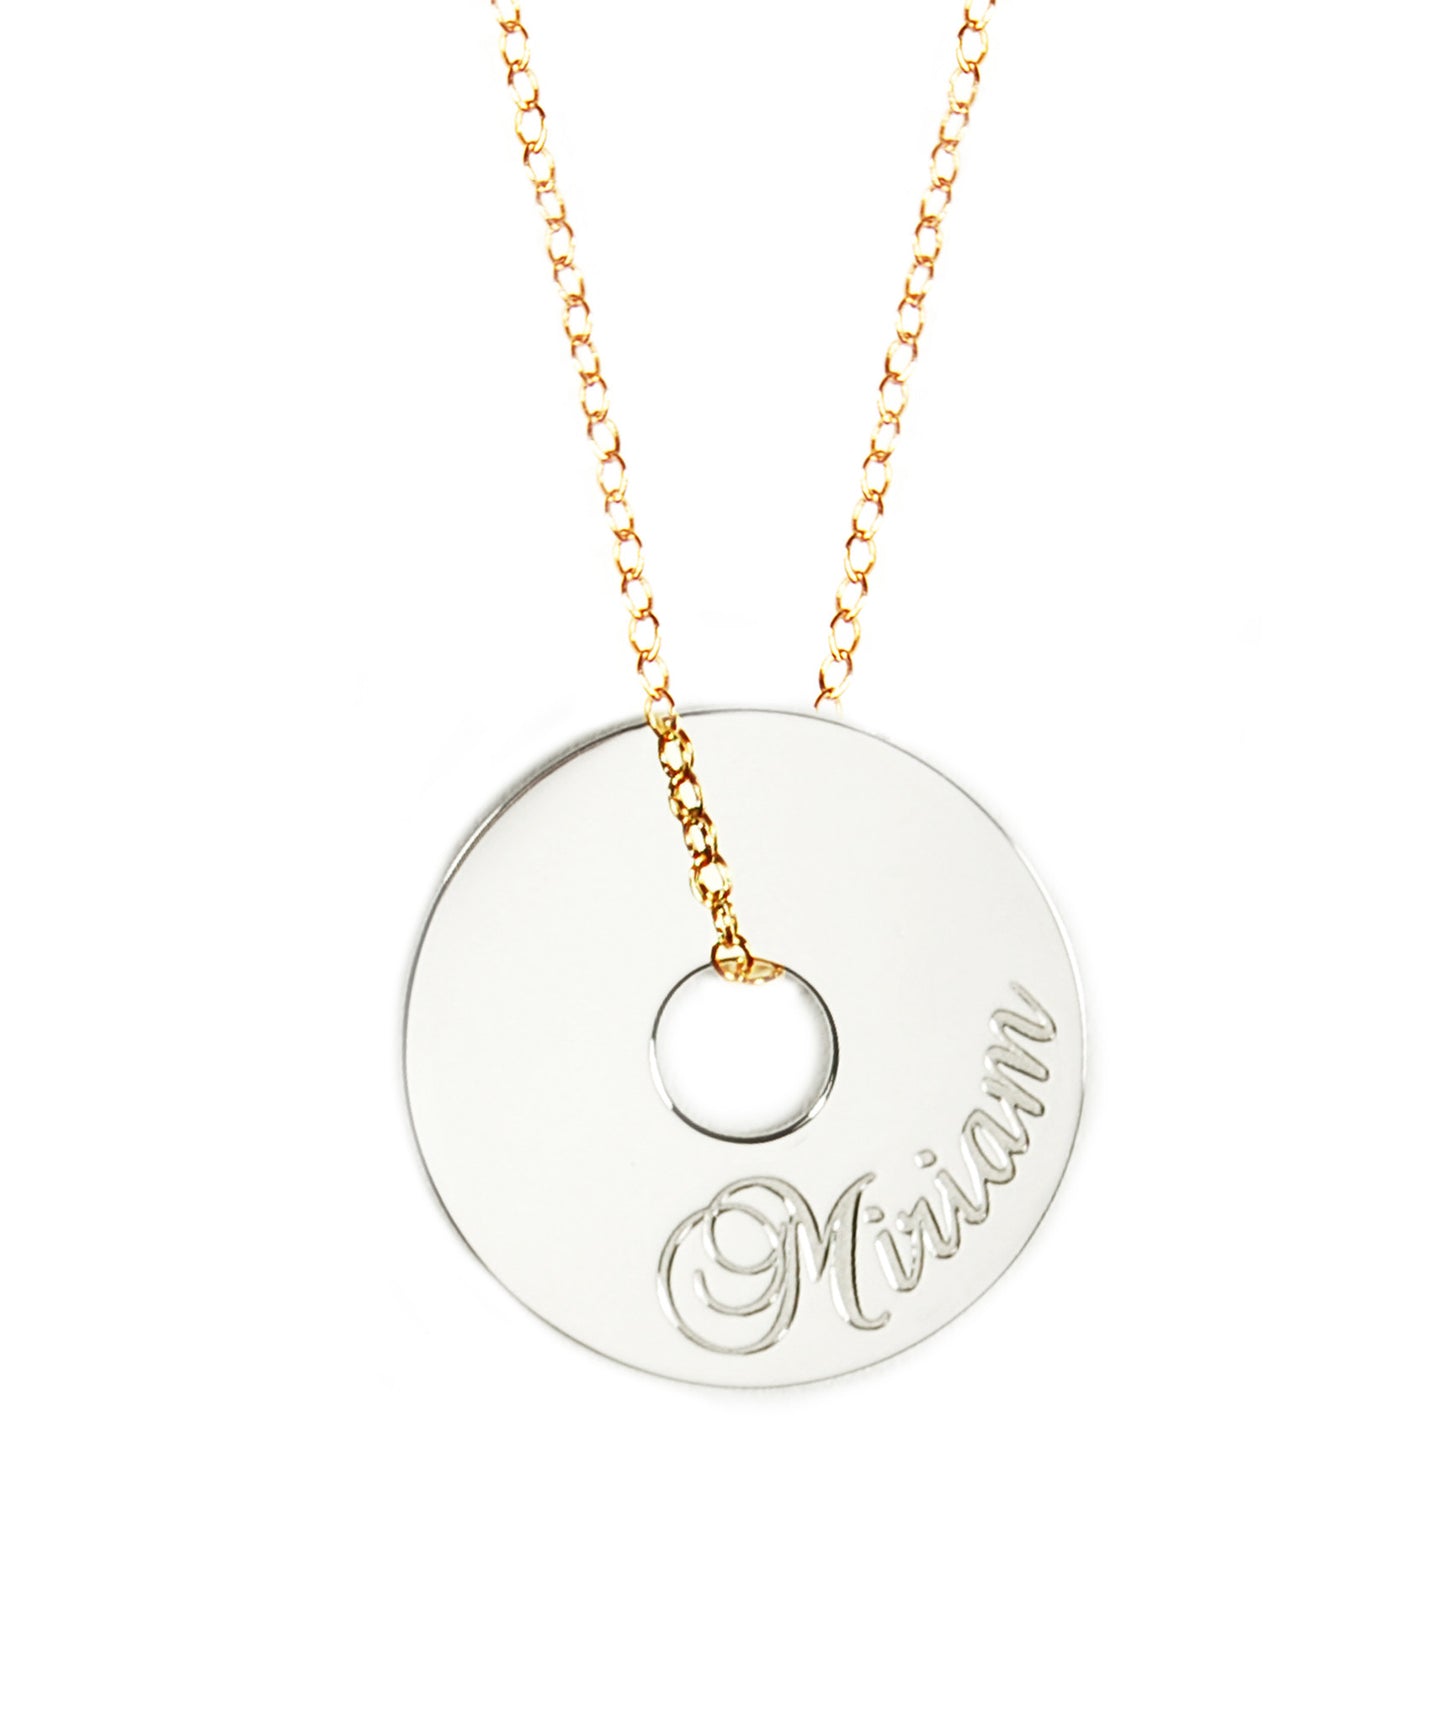 Personalized Token Necklace